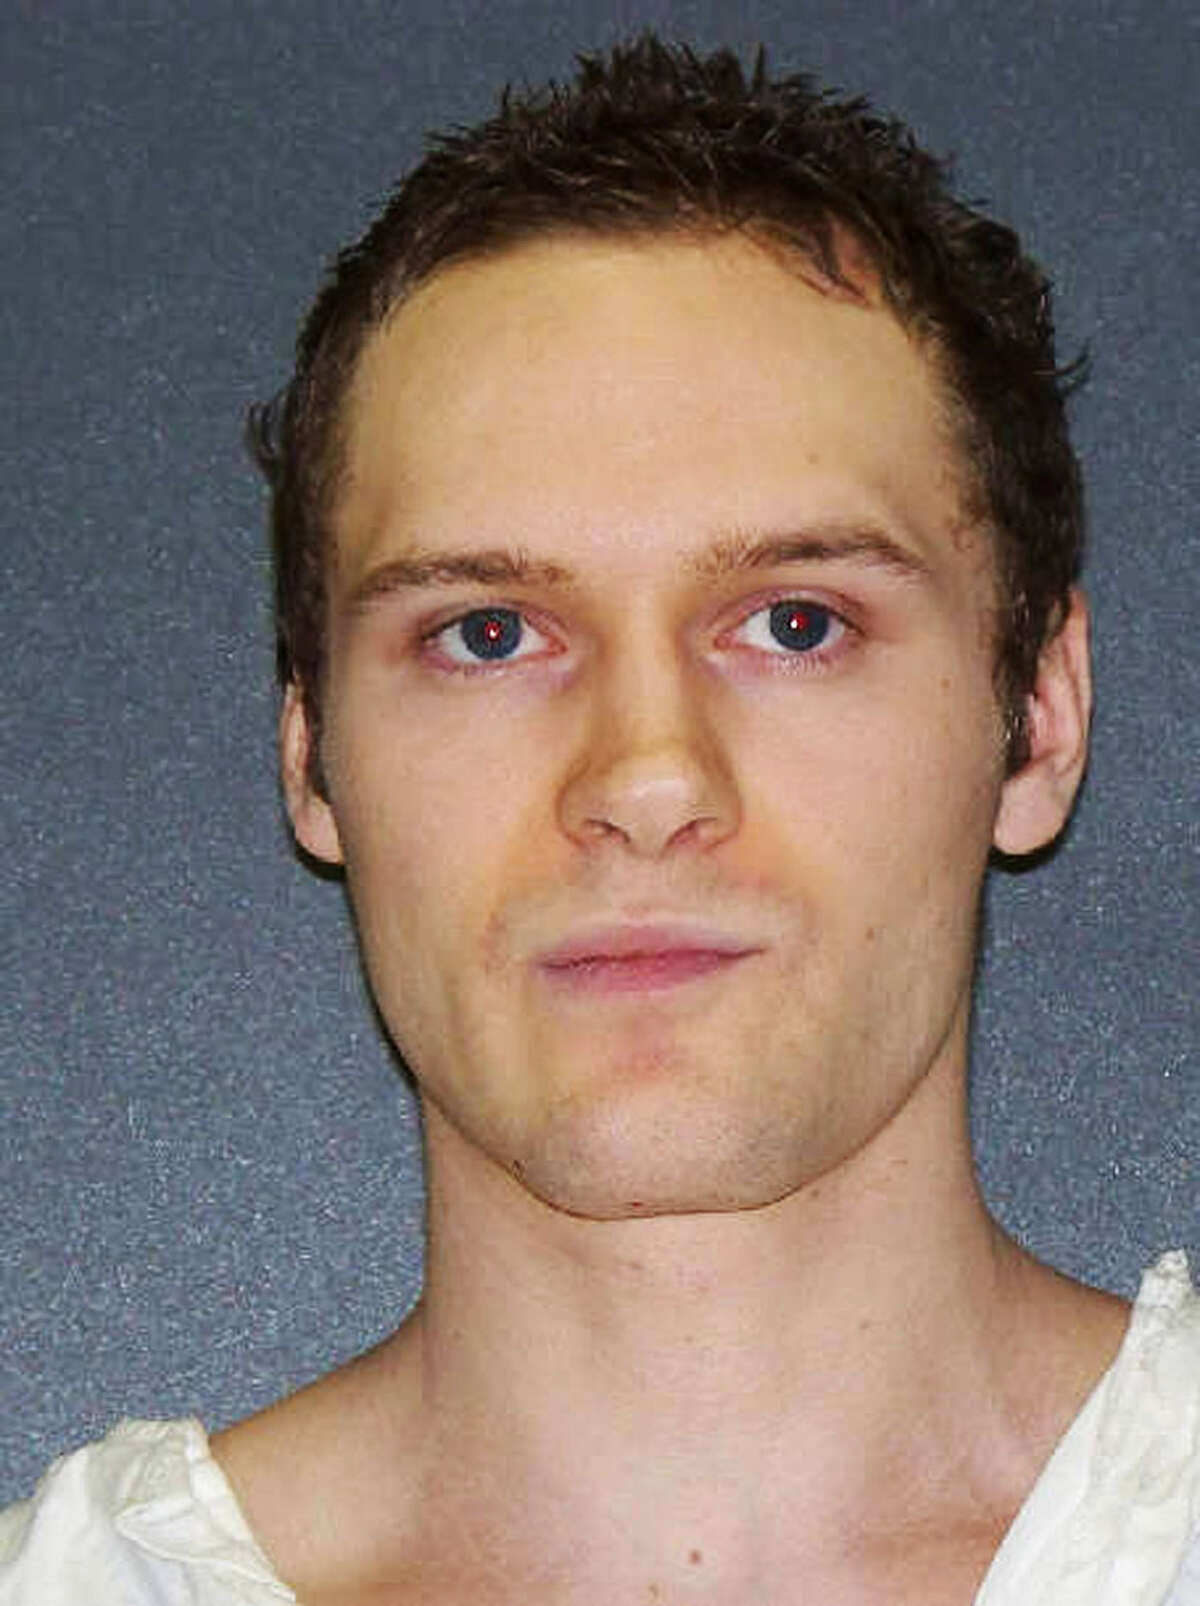 This undated photo provided by the Texas Department of Criminal Justice shows Richard Cobb. Cobb is set for lethal injection Thursday evening, April 25, 2013 in Huntsville, Texas for the slaying of 37-year-old Kenneth Vandever. Two women also were shot and one raped during the attack that began in Rusk, about 120 miles southeast of Dallas.